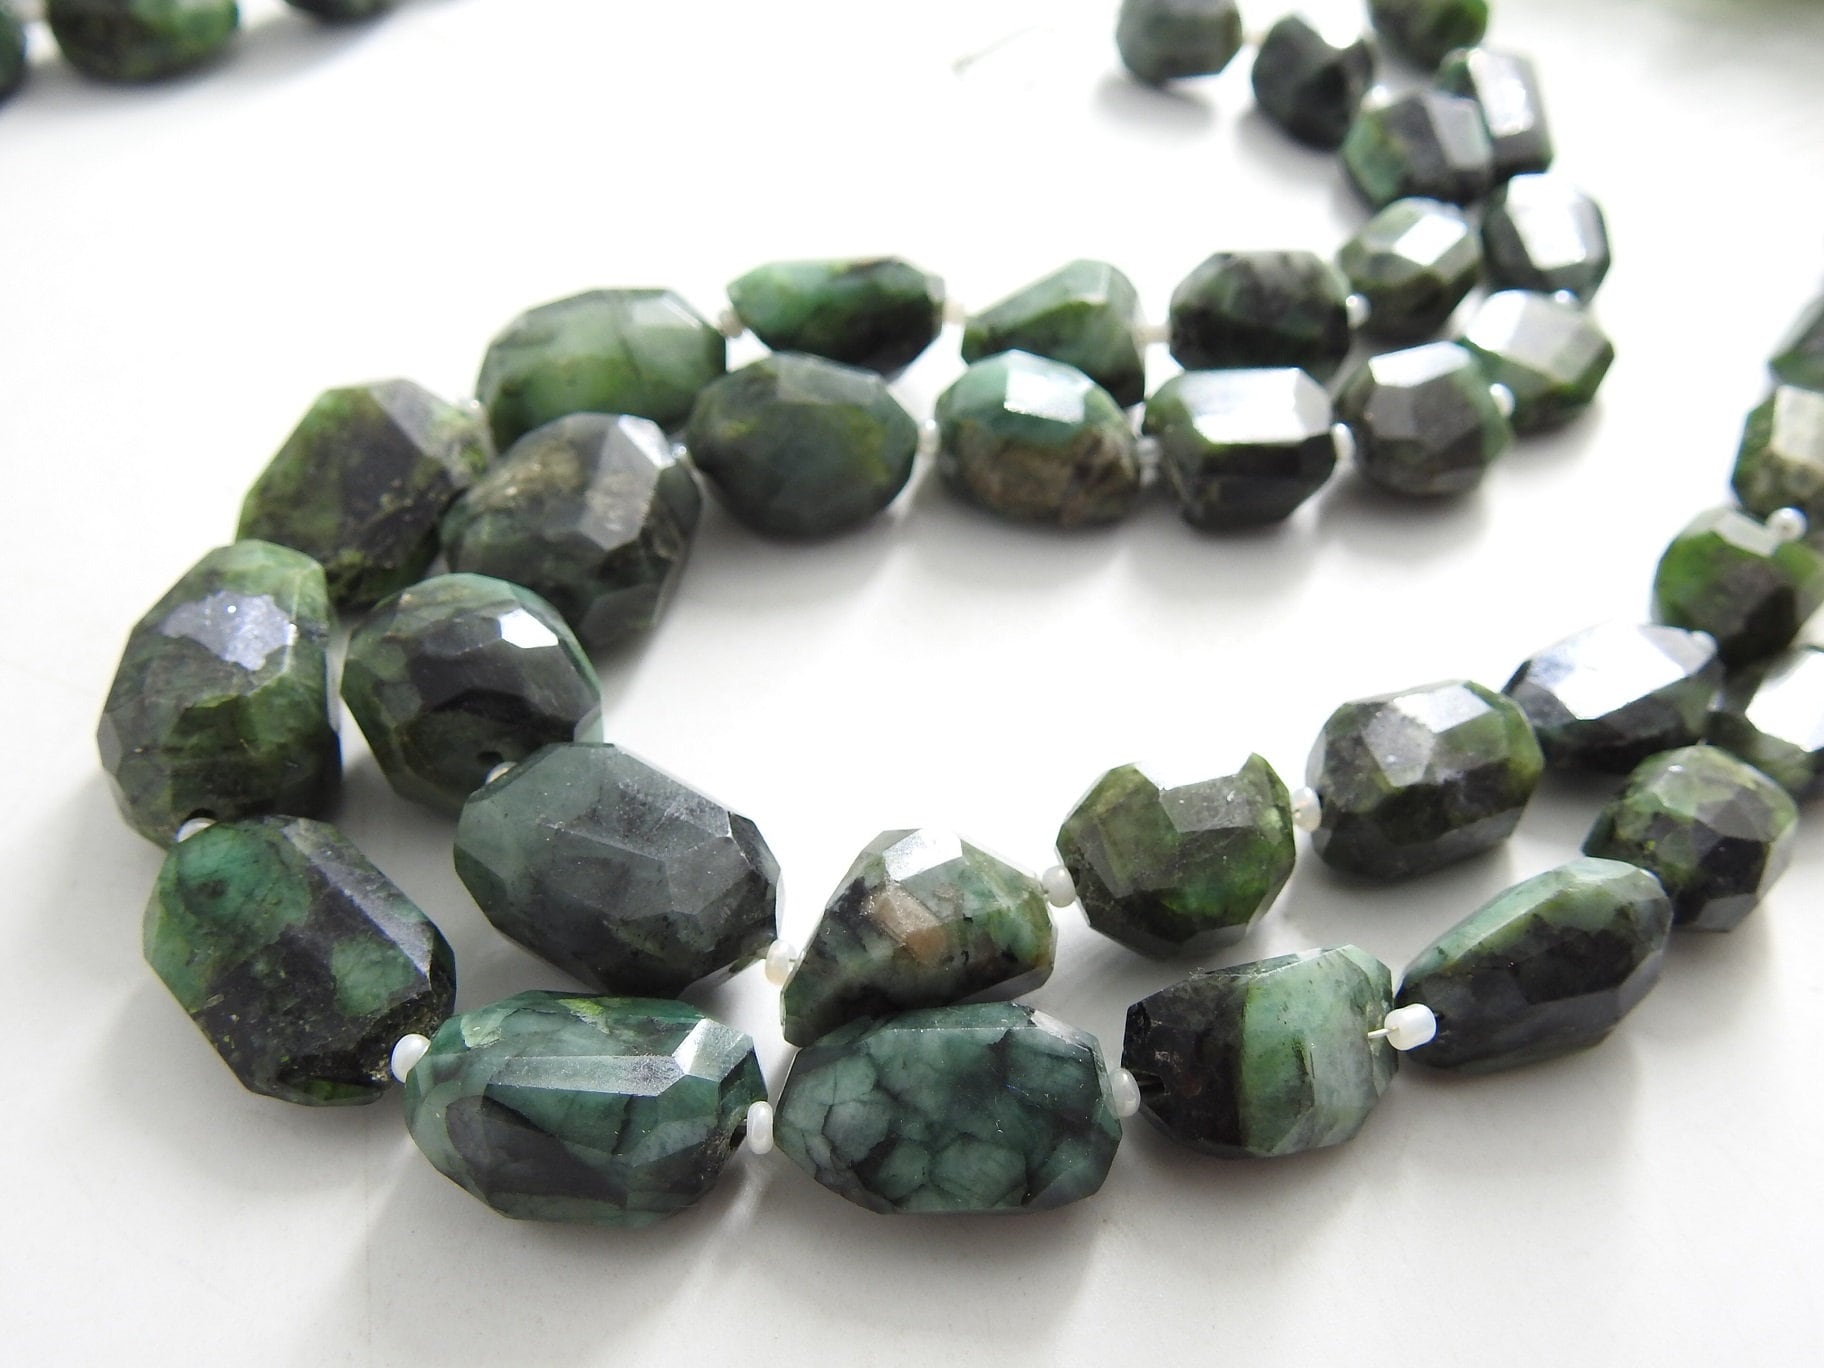 100%Natural,Emerald Faceted Tumble,Nugget,Irregular Shape Bead,Loose Stone,Handmade 12Inch 18X12To10XMM Approx Wholesaler,Supplies (pme)TU1 | Save 33% - Rajasthan Living 11